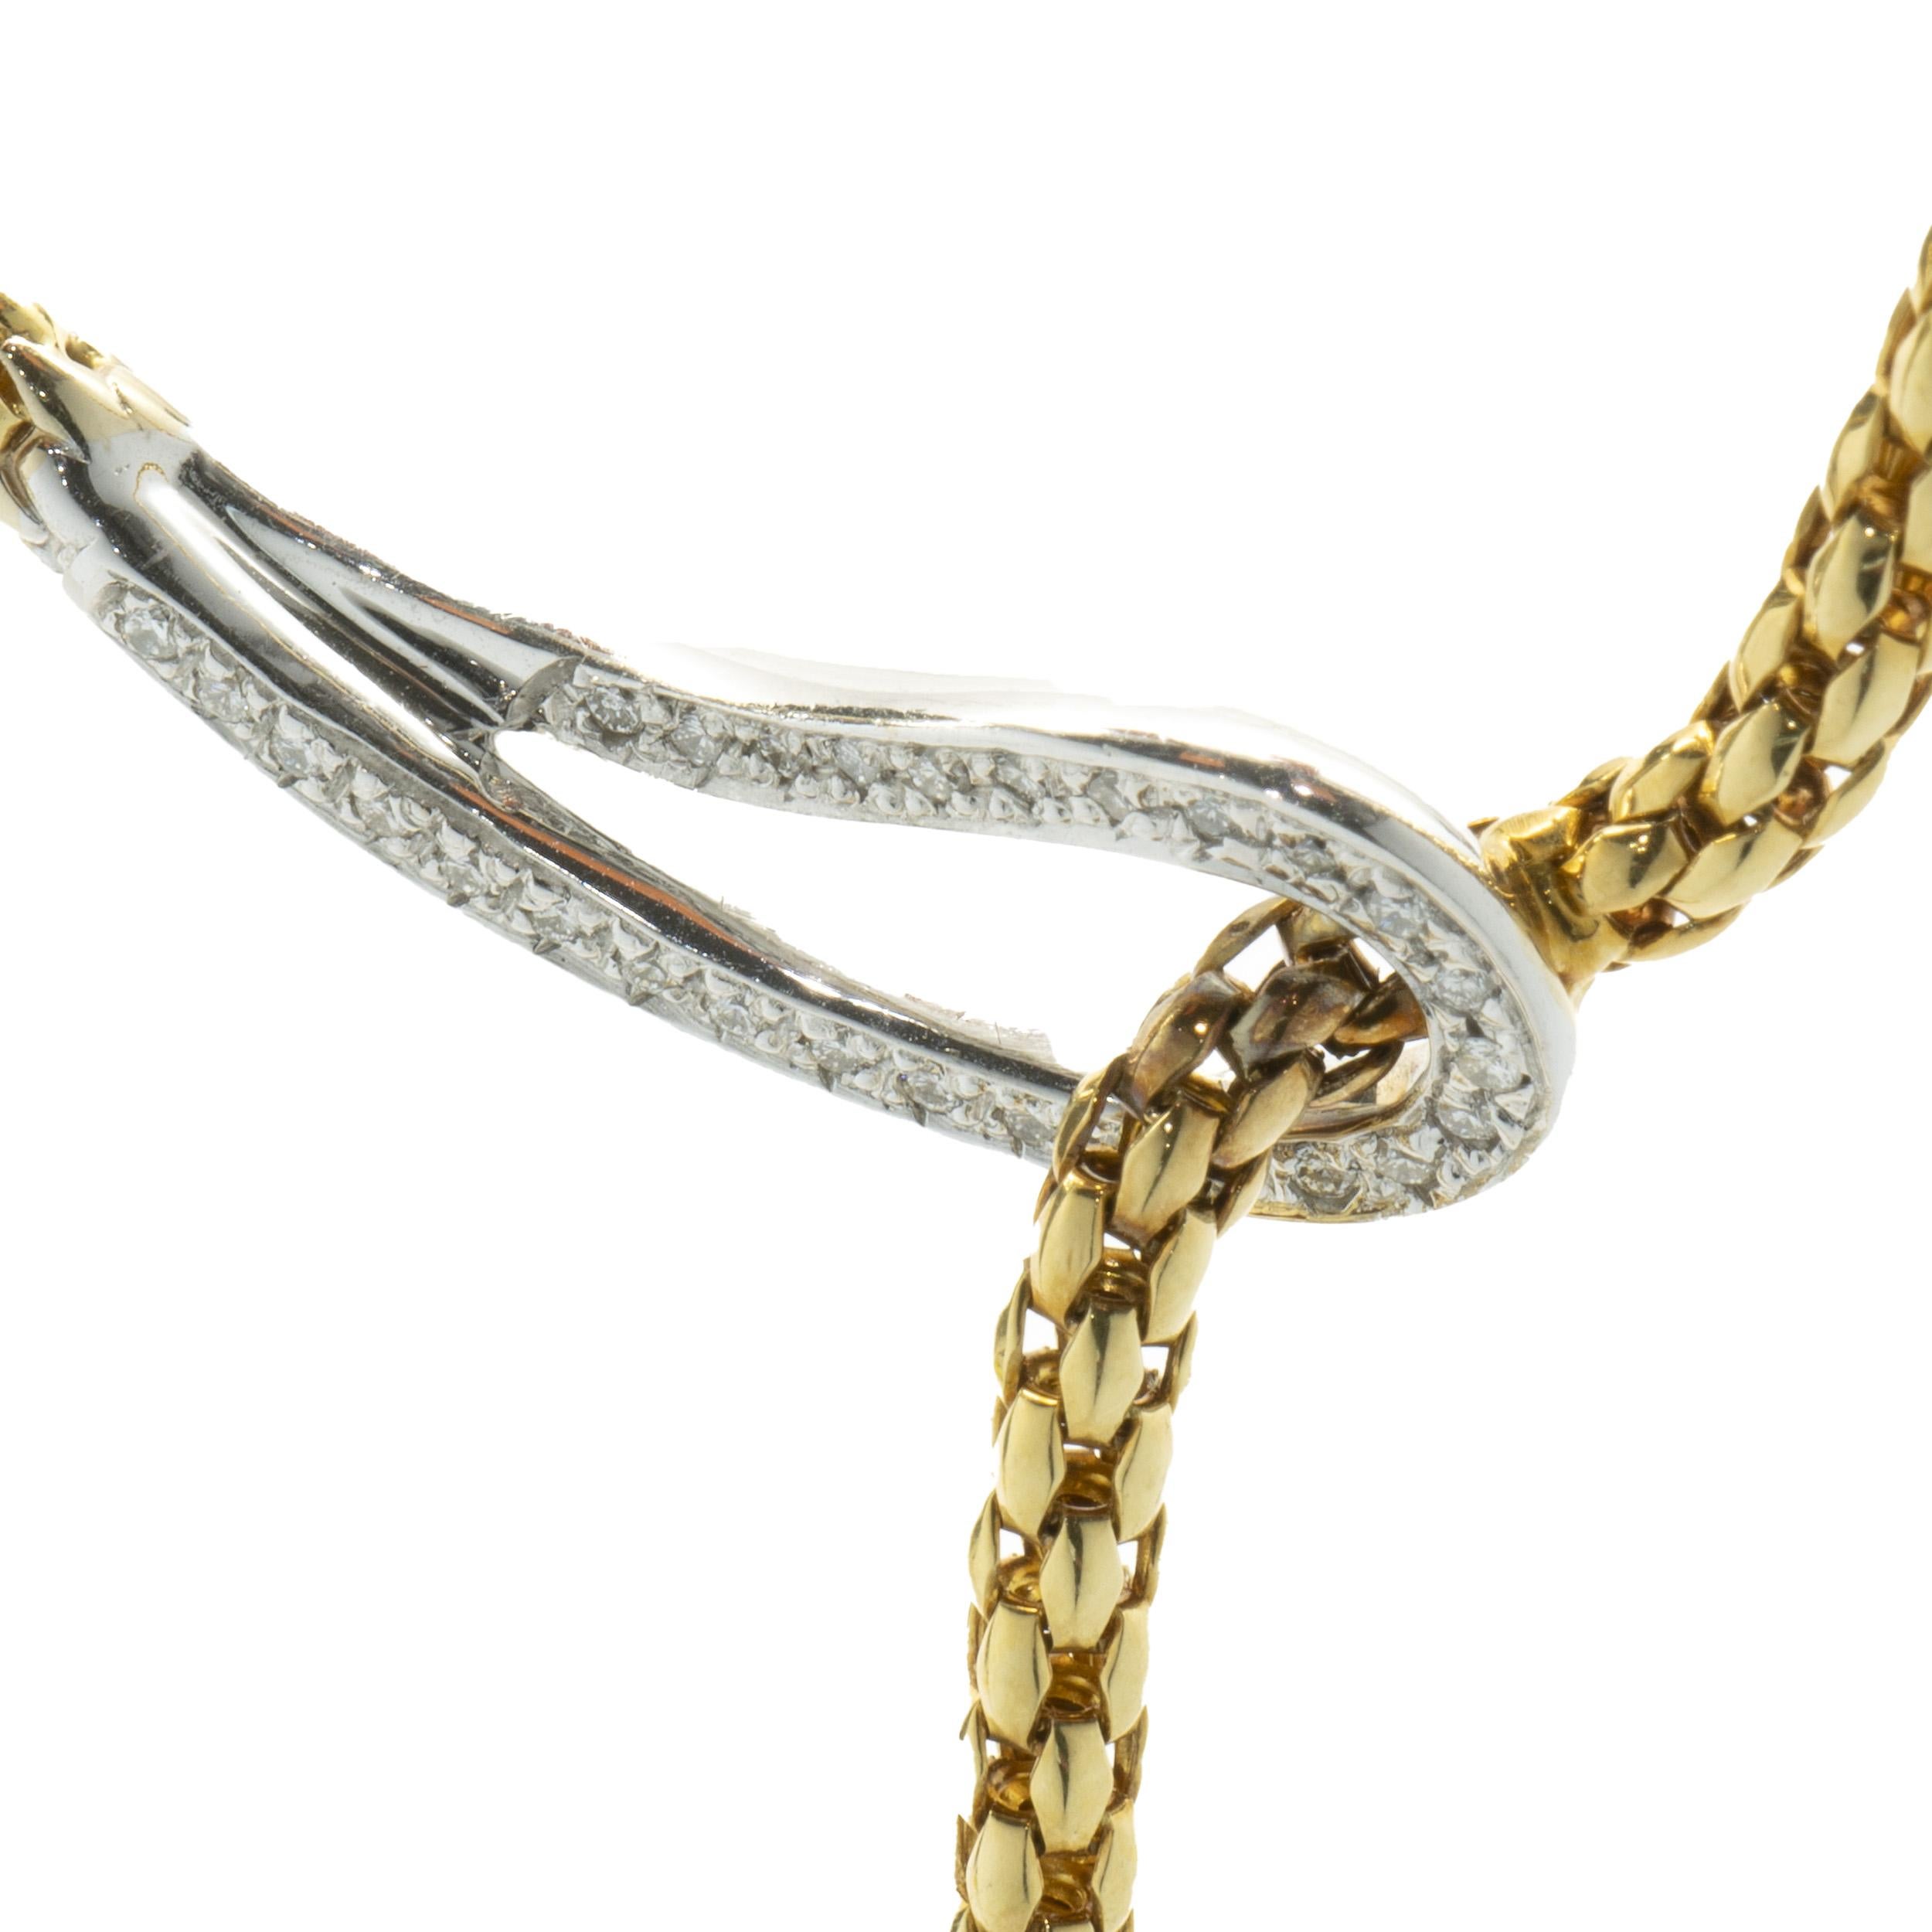 Designer: Fope
Material: 18K yellow & white gold
Diamond: 28 round brilliant cut = 0.15cttw
Color: G
Clarity: VS2
Dimensions: necklace measures 16-inches
Weight: 21.13 grams